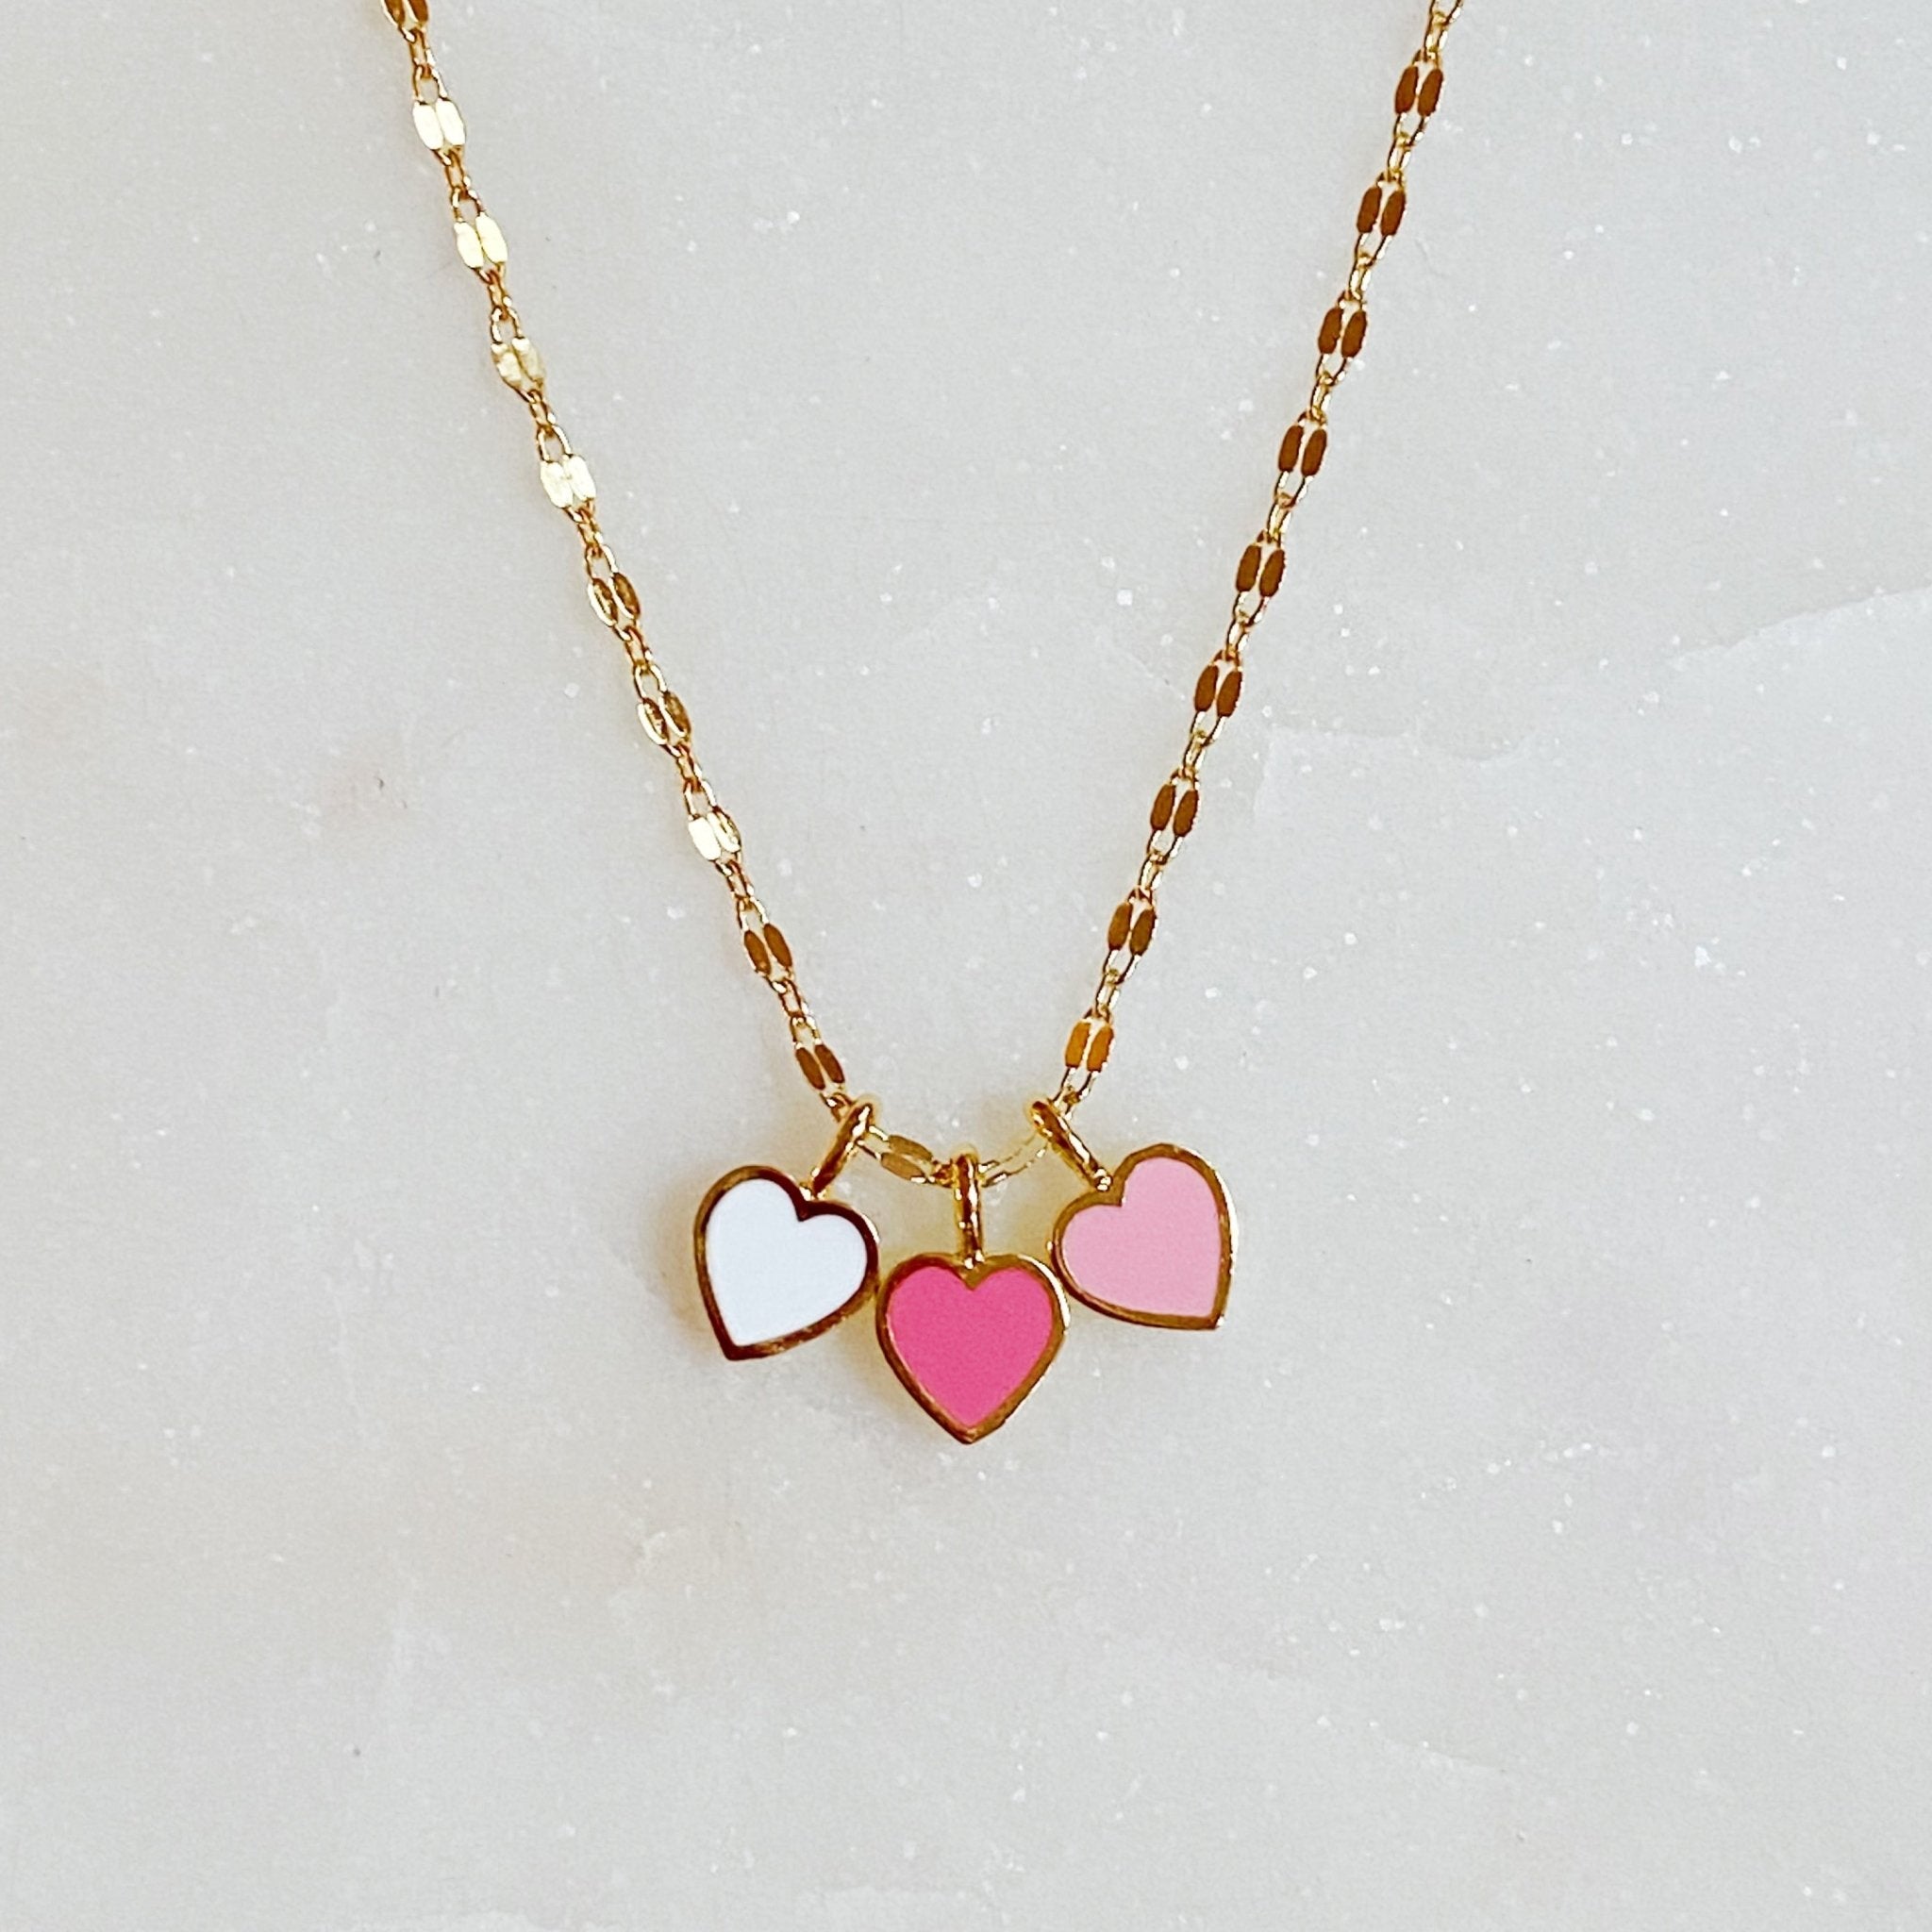 Triple My Love Heart Necklace - The Kindness Cause